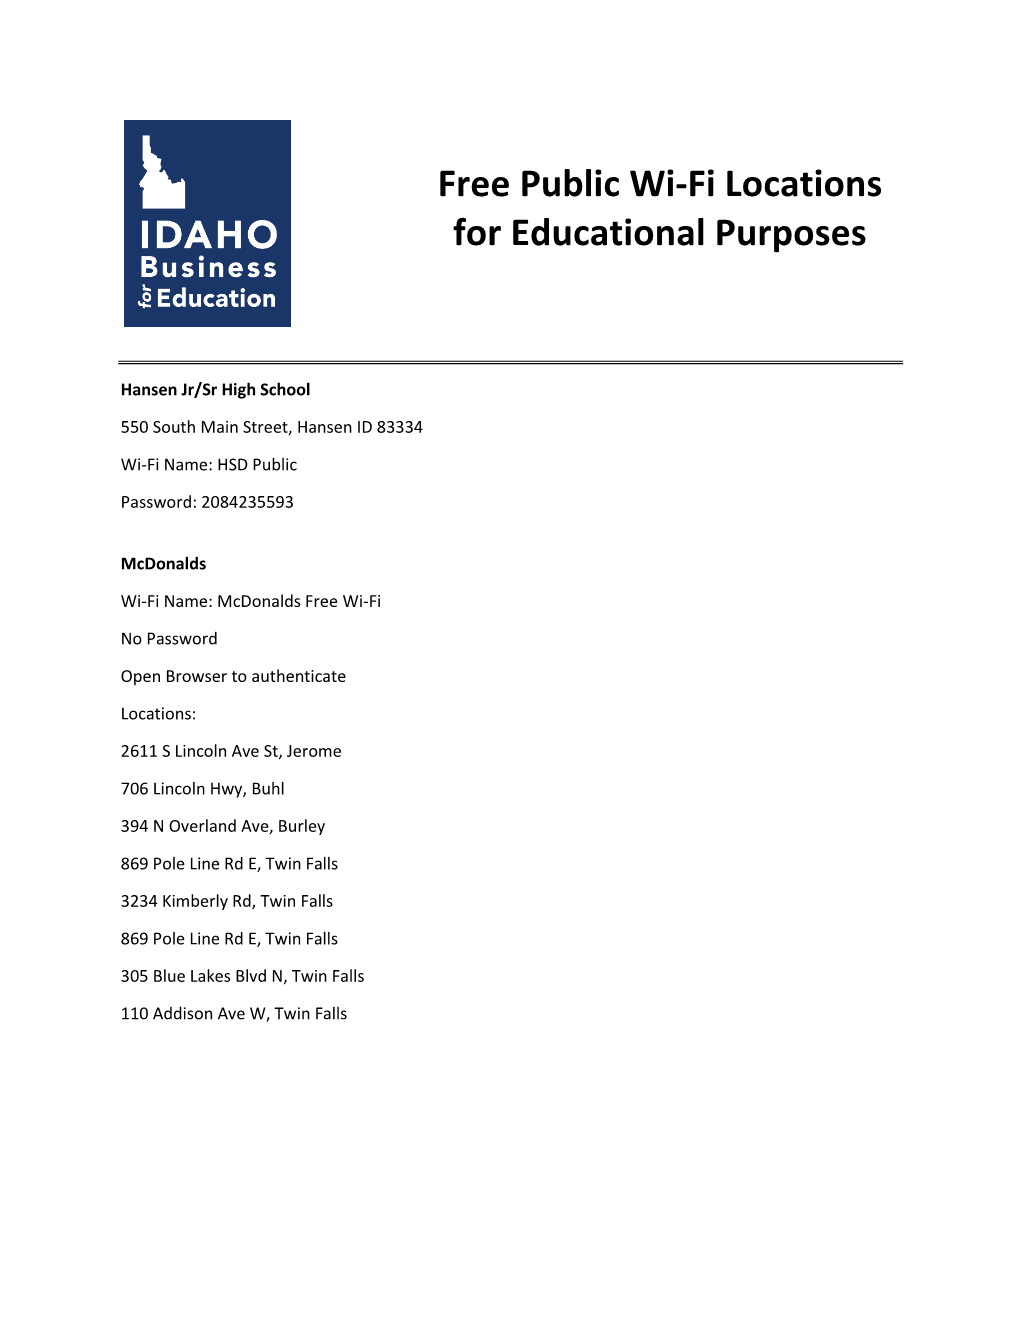 Free Public Wi-Fi Locations for Educational Purposes